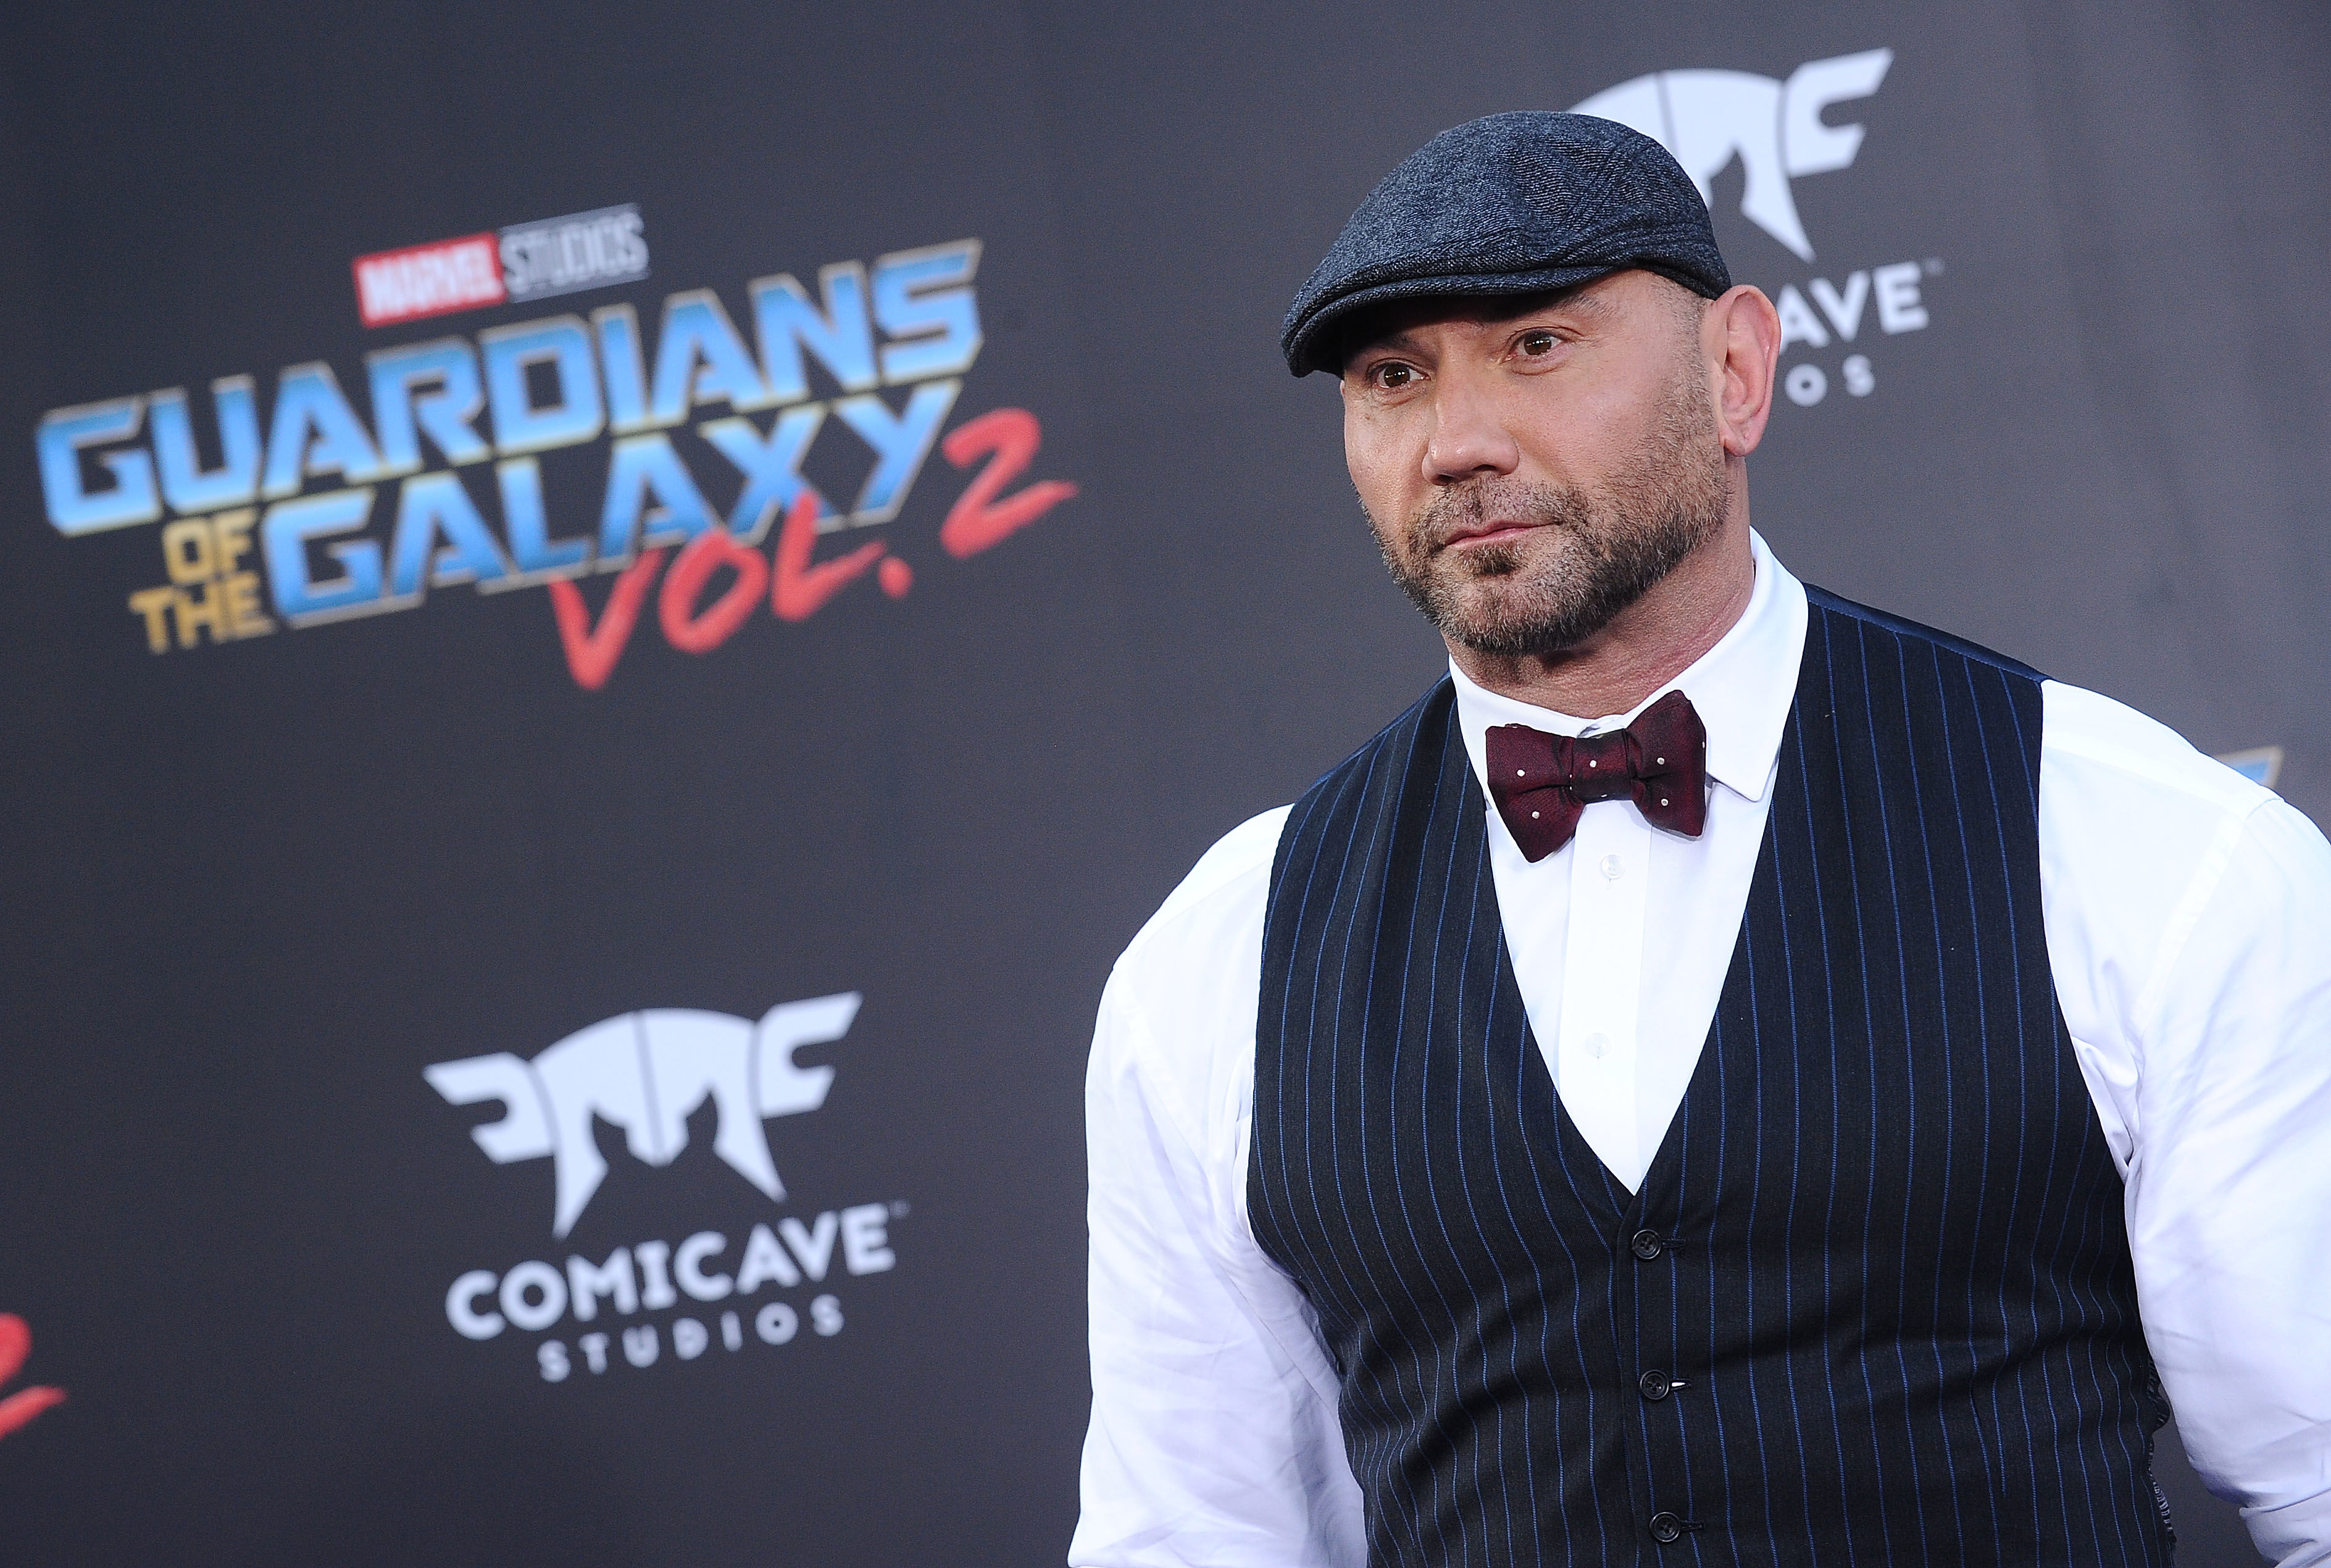 Where to watch Jason Momoa and Dave Bautista's series See?